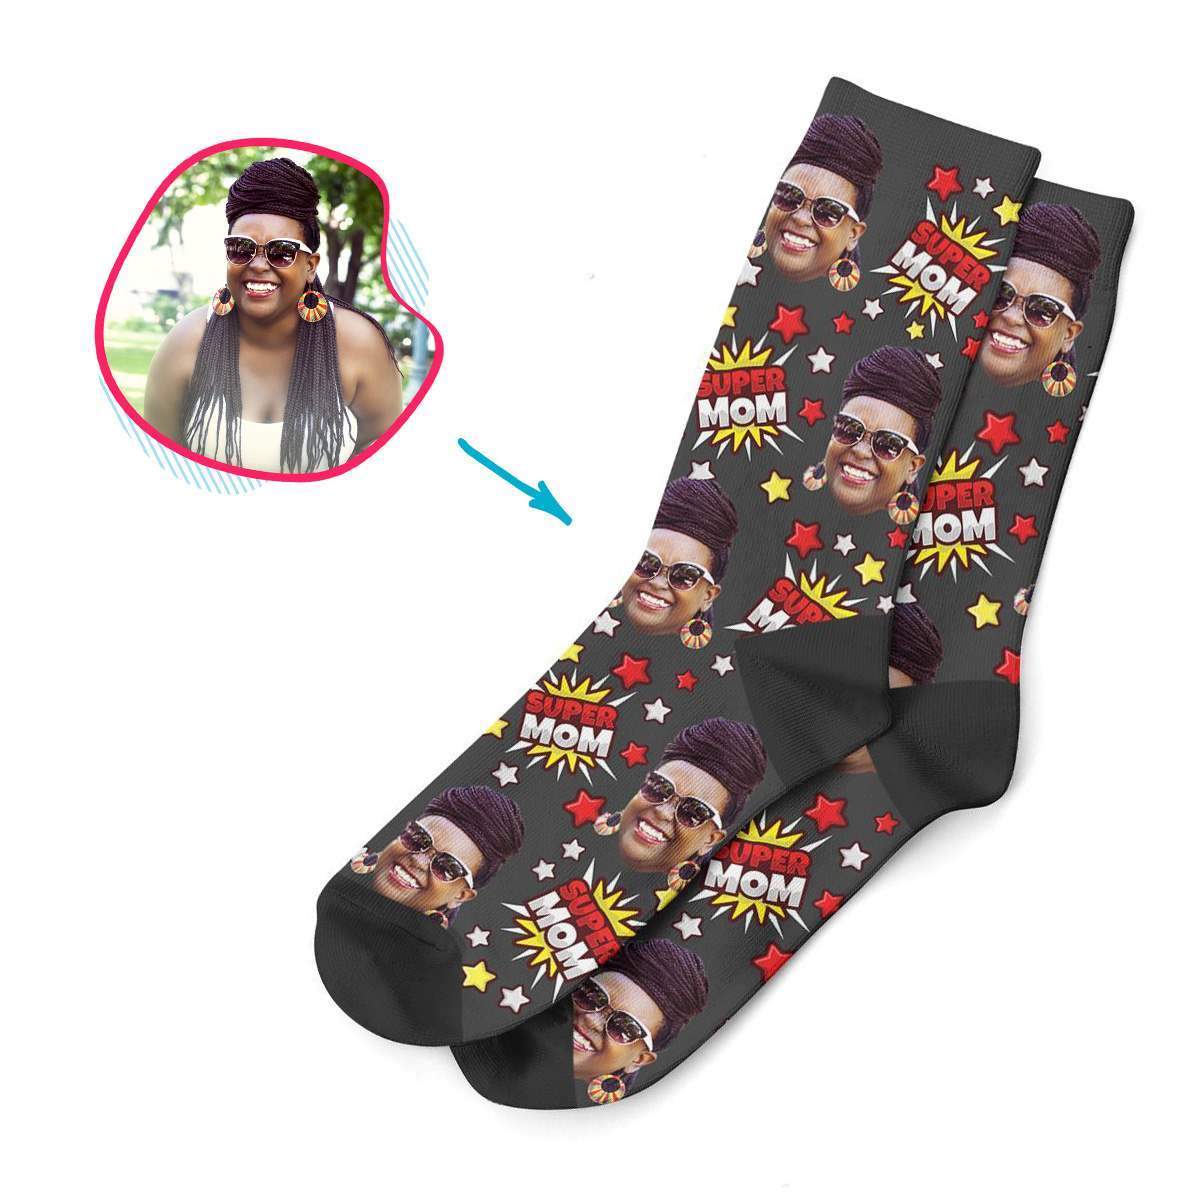 dark Super Mom socks personalized with photo of face printed on them